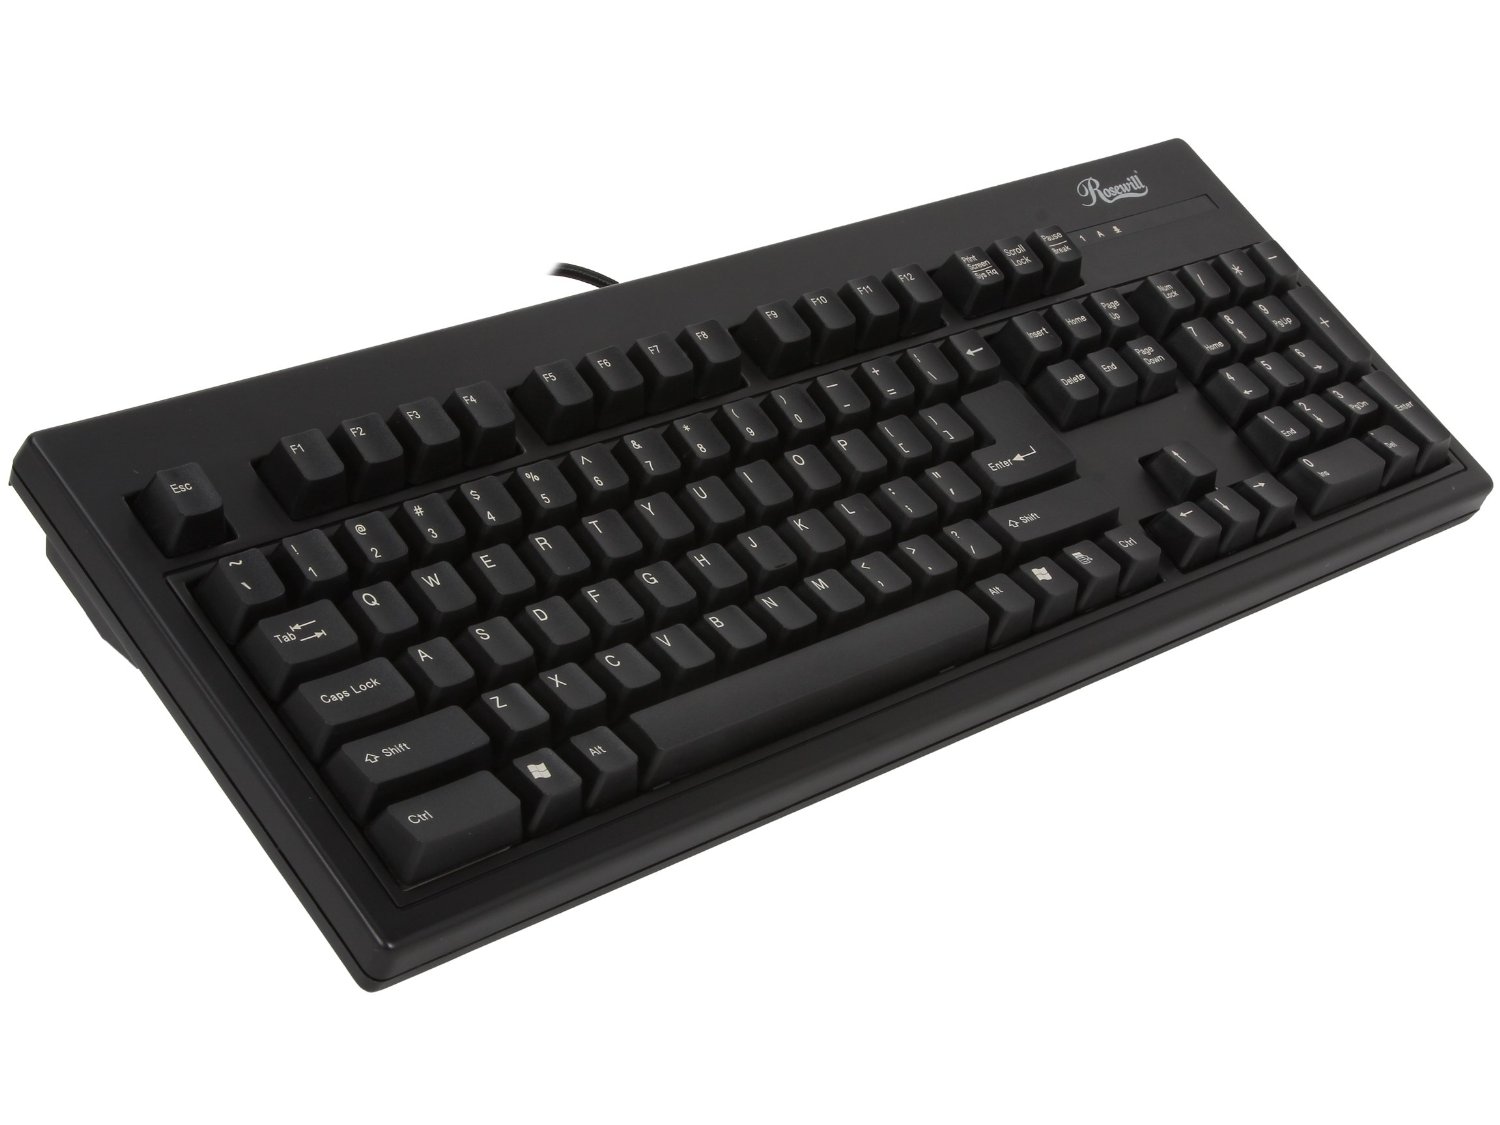 Rosewill RK-6000 Mechanical Gaming Keyboard with Programmable Keys Anti-Ghosting Feature and Laser Printed Keys